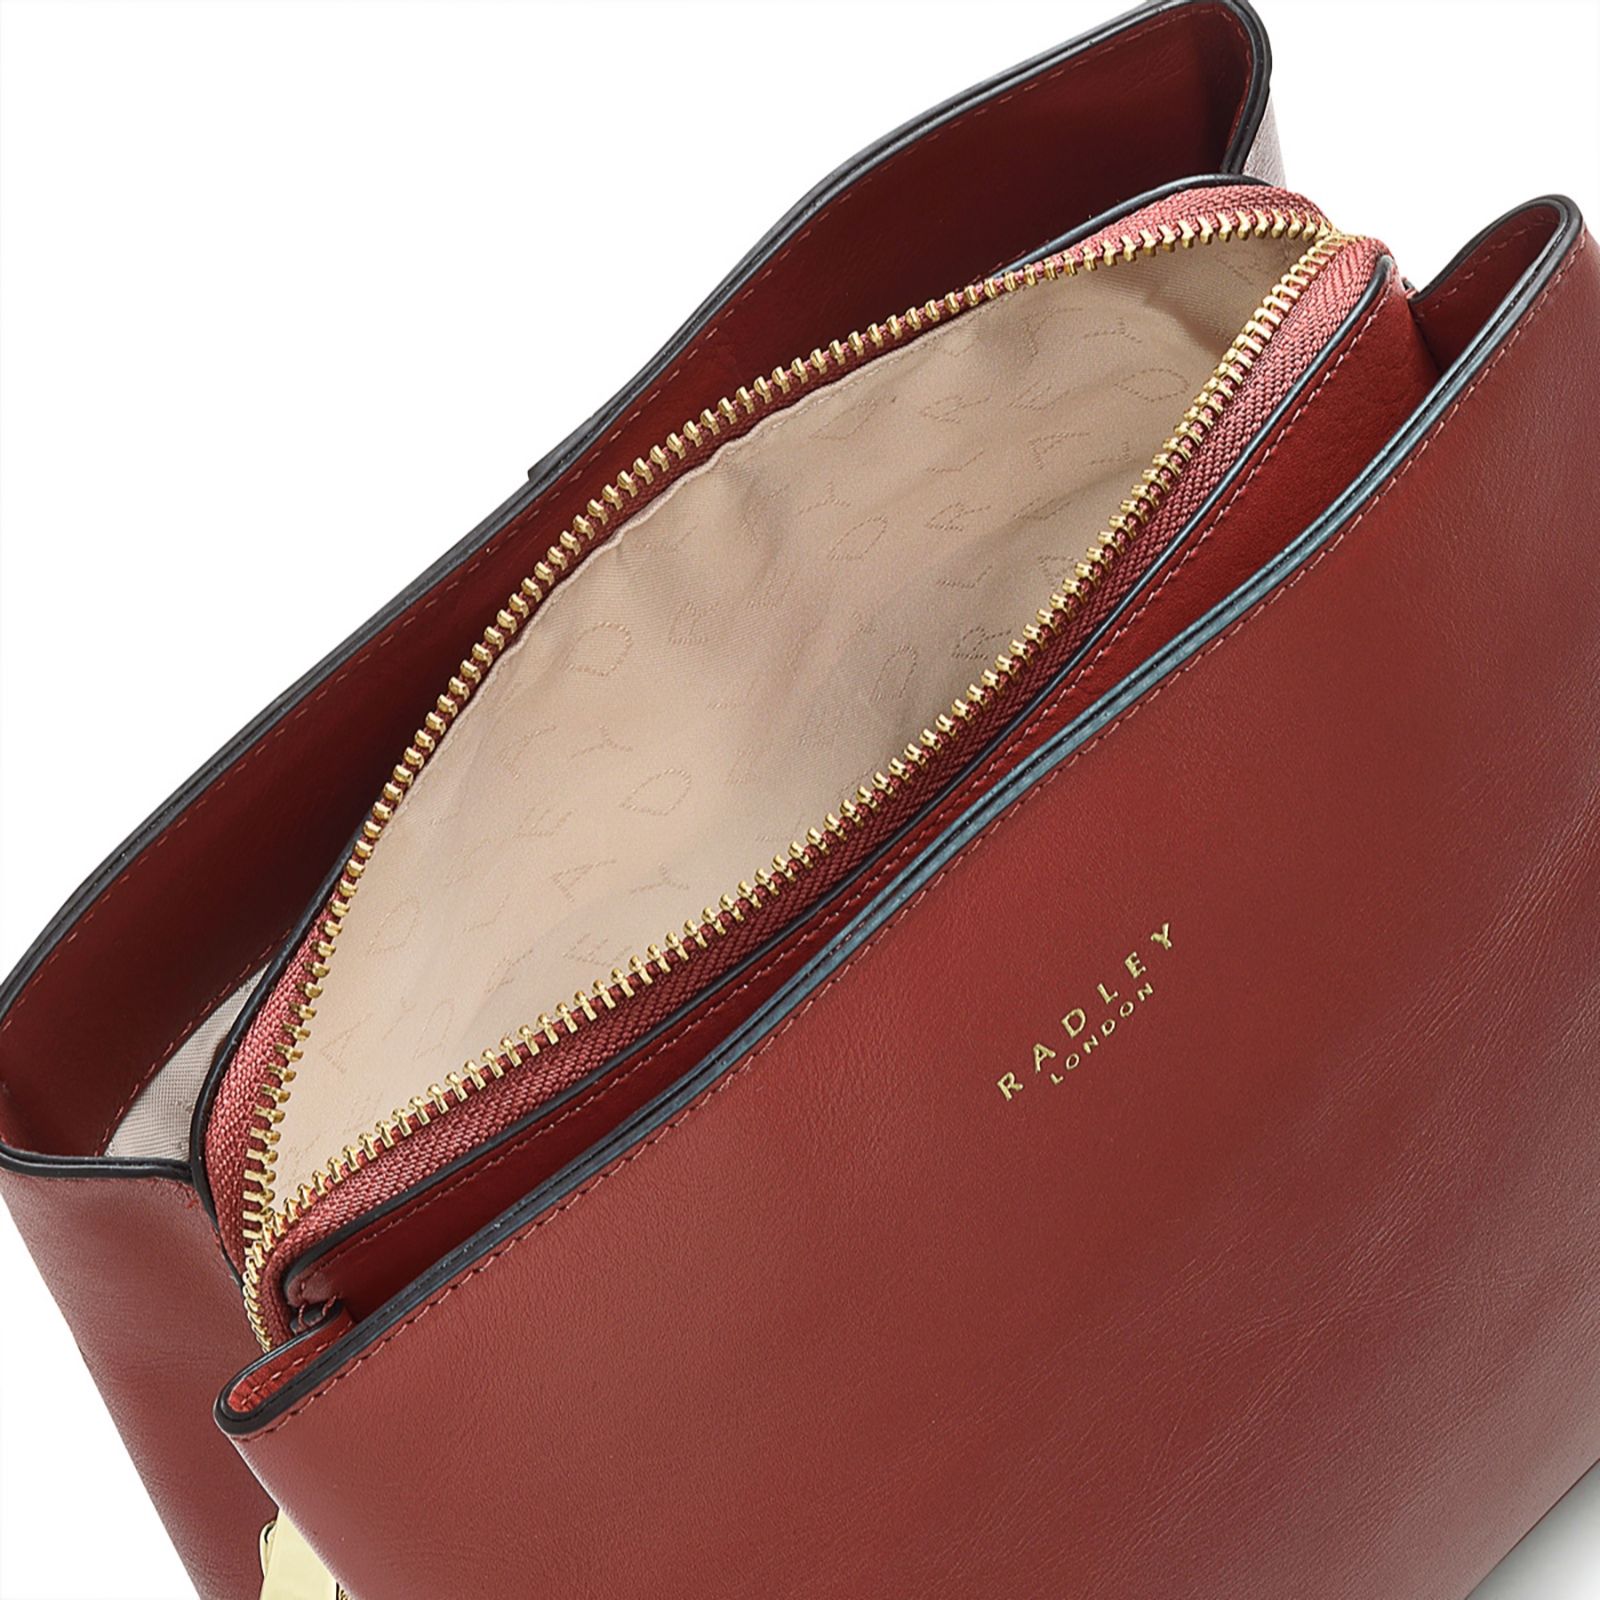 RADLEY London Dukes Place Medium Leather Compartment Multiway on